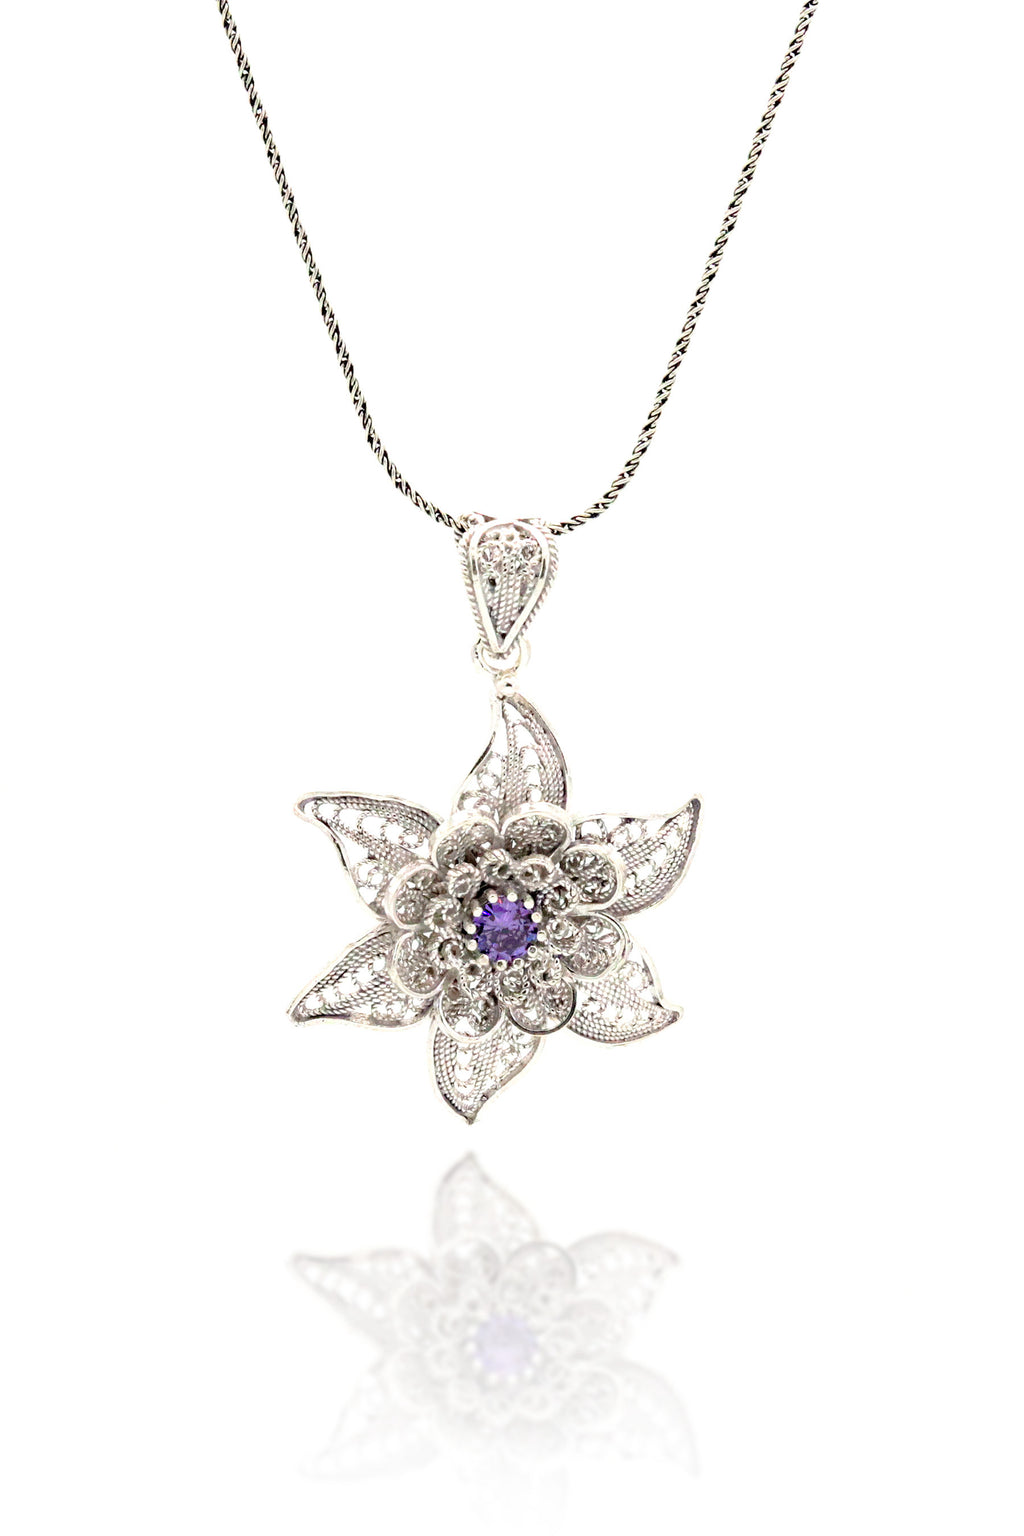 Floral Model Authentic Filigree Silver Necklace With Amethyst (NG201019405)